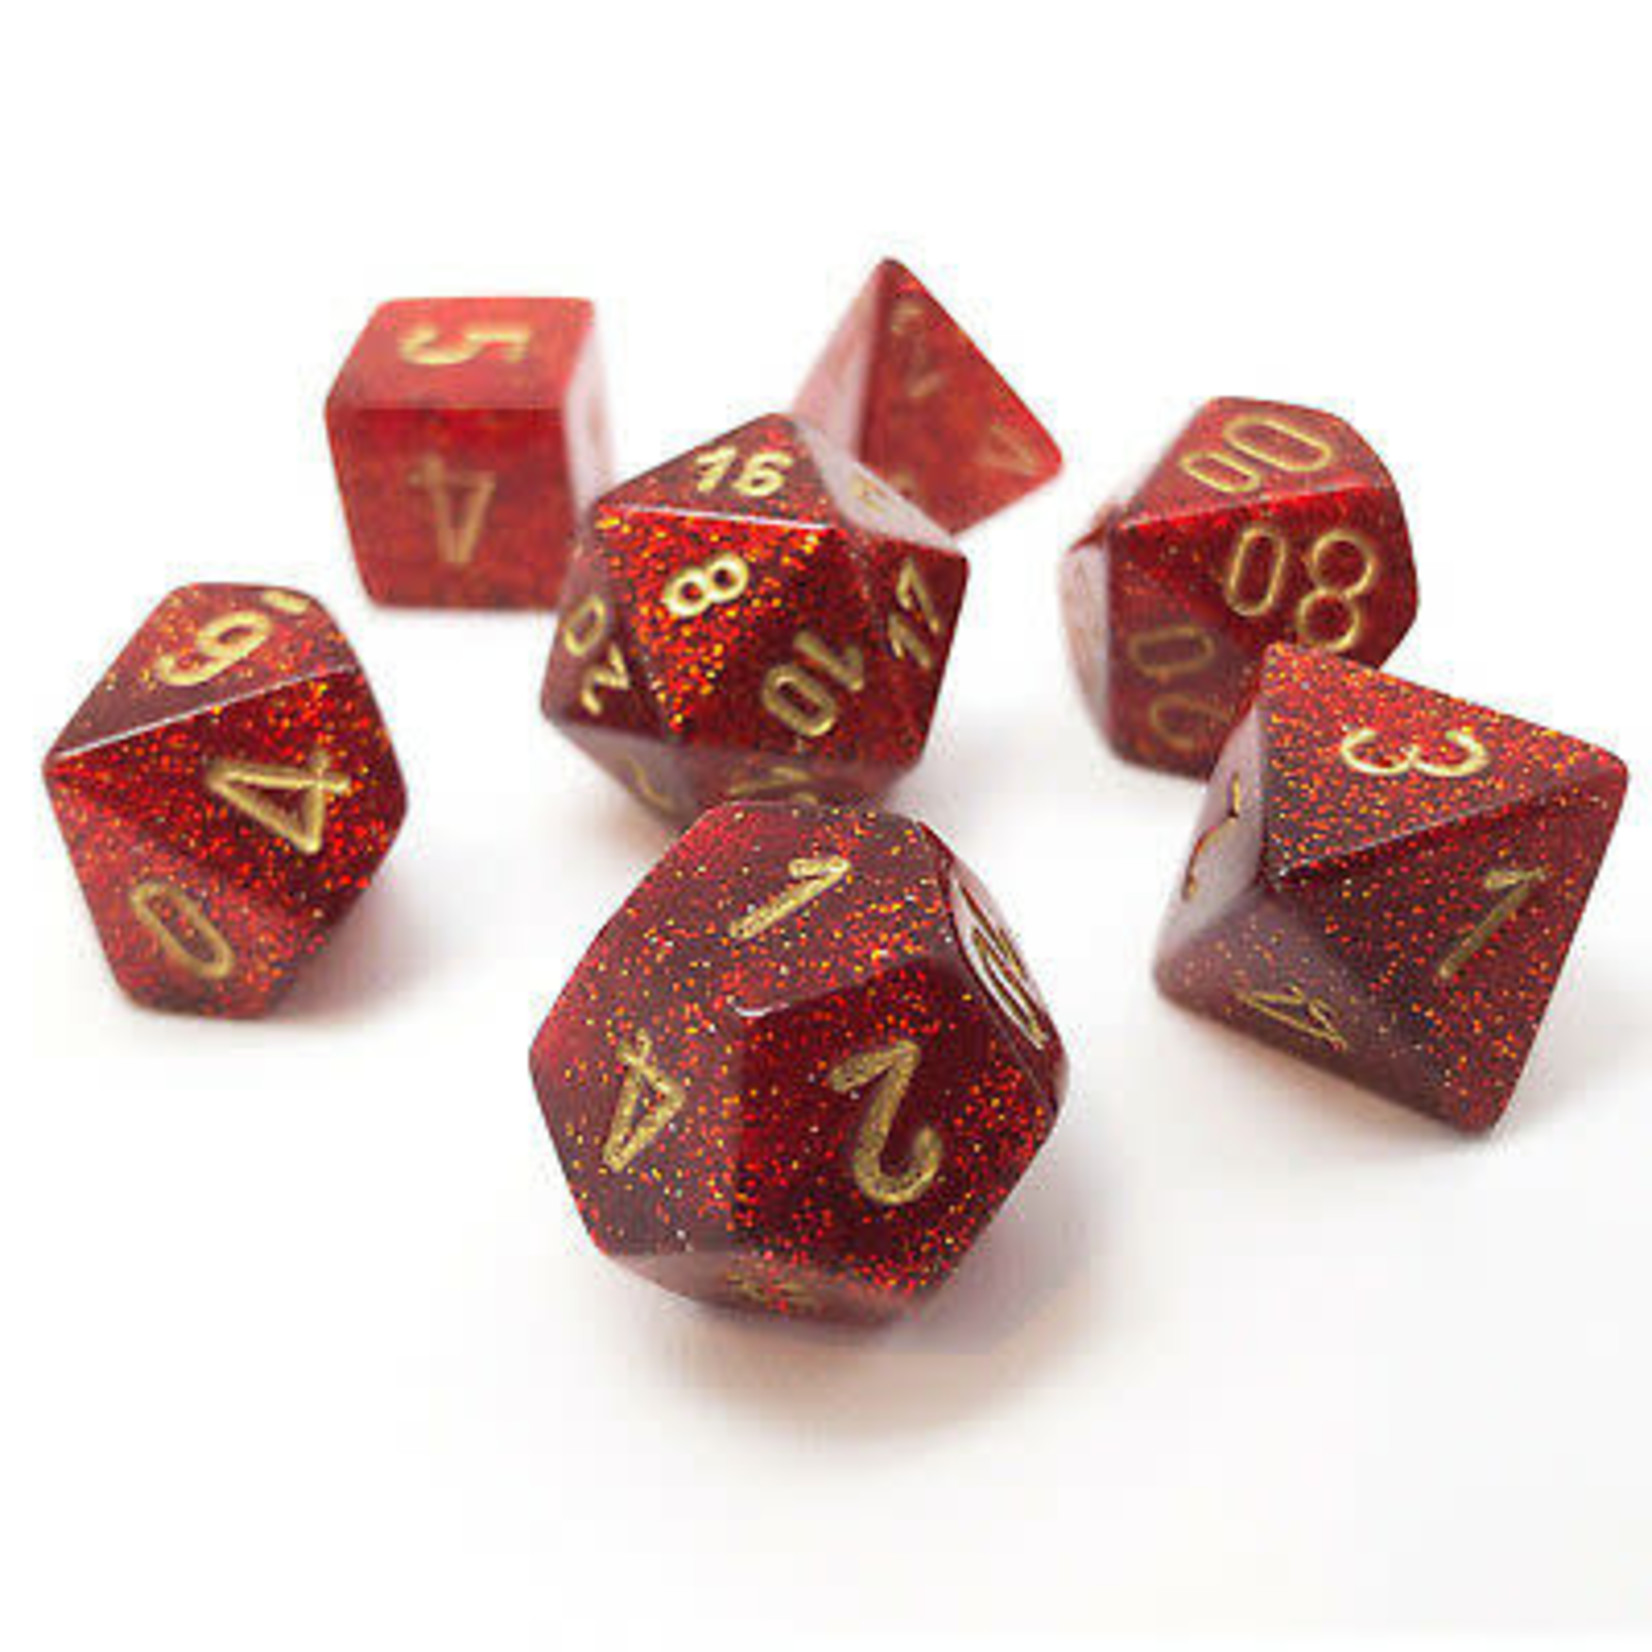 Chessex Chessex Glitter Ruby with Gold Polyhedral 7 die set